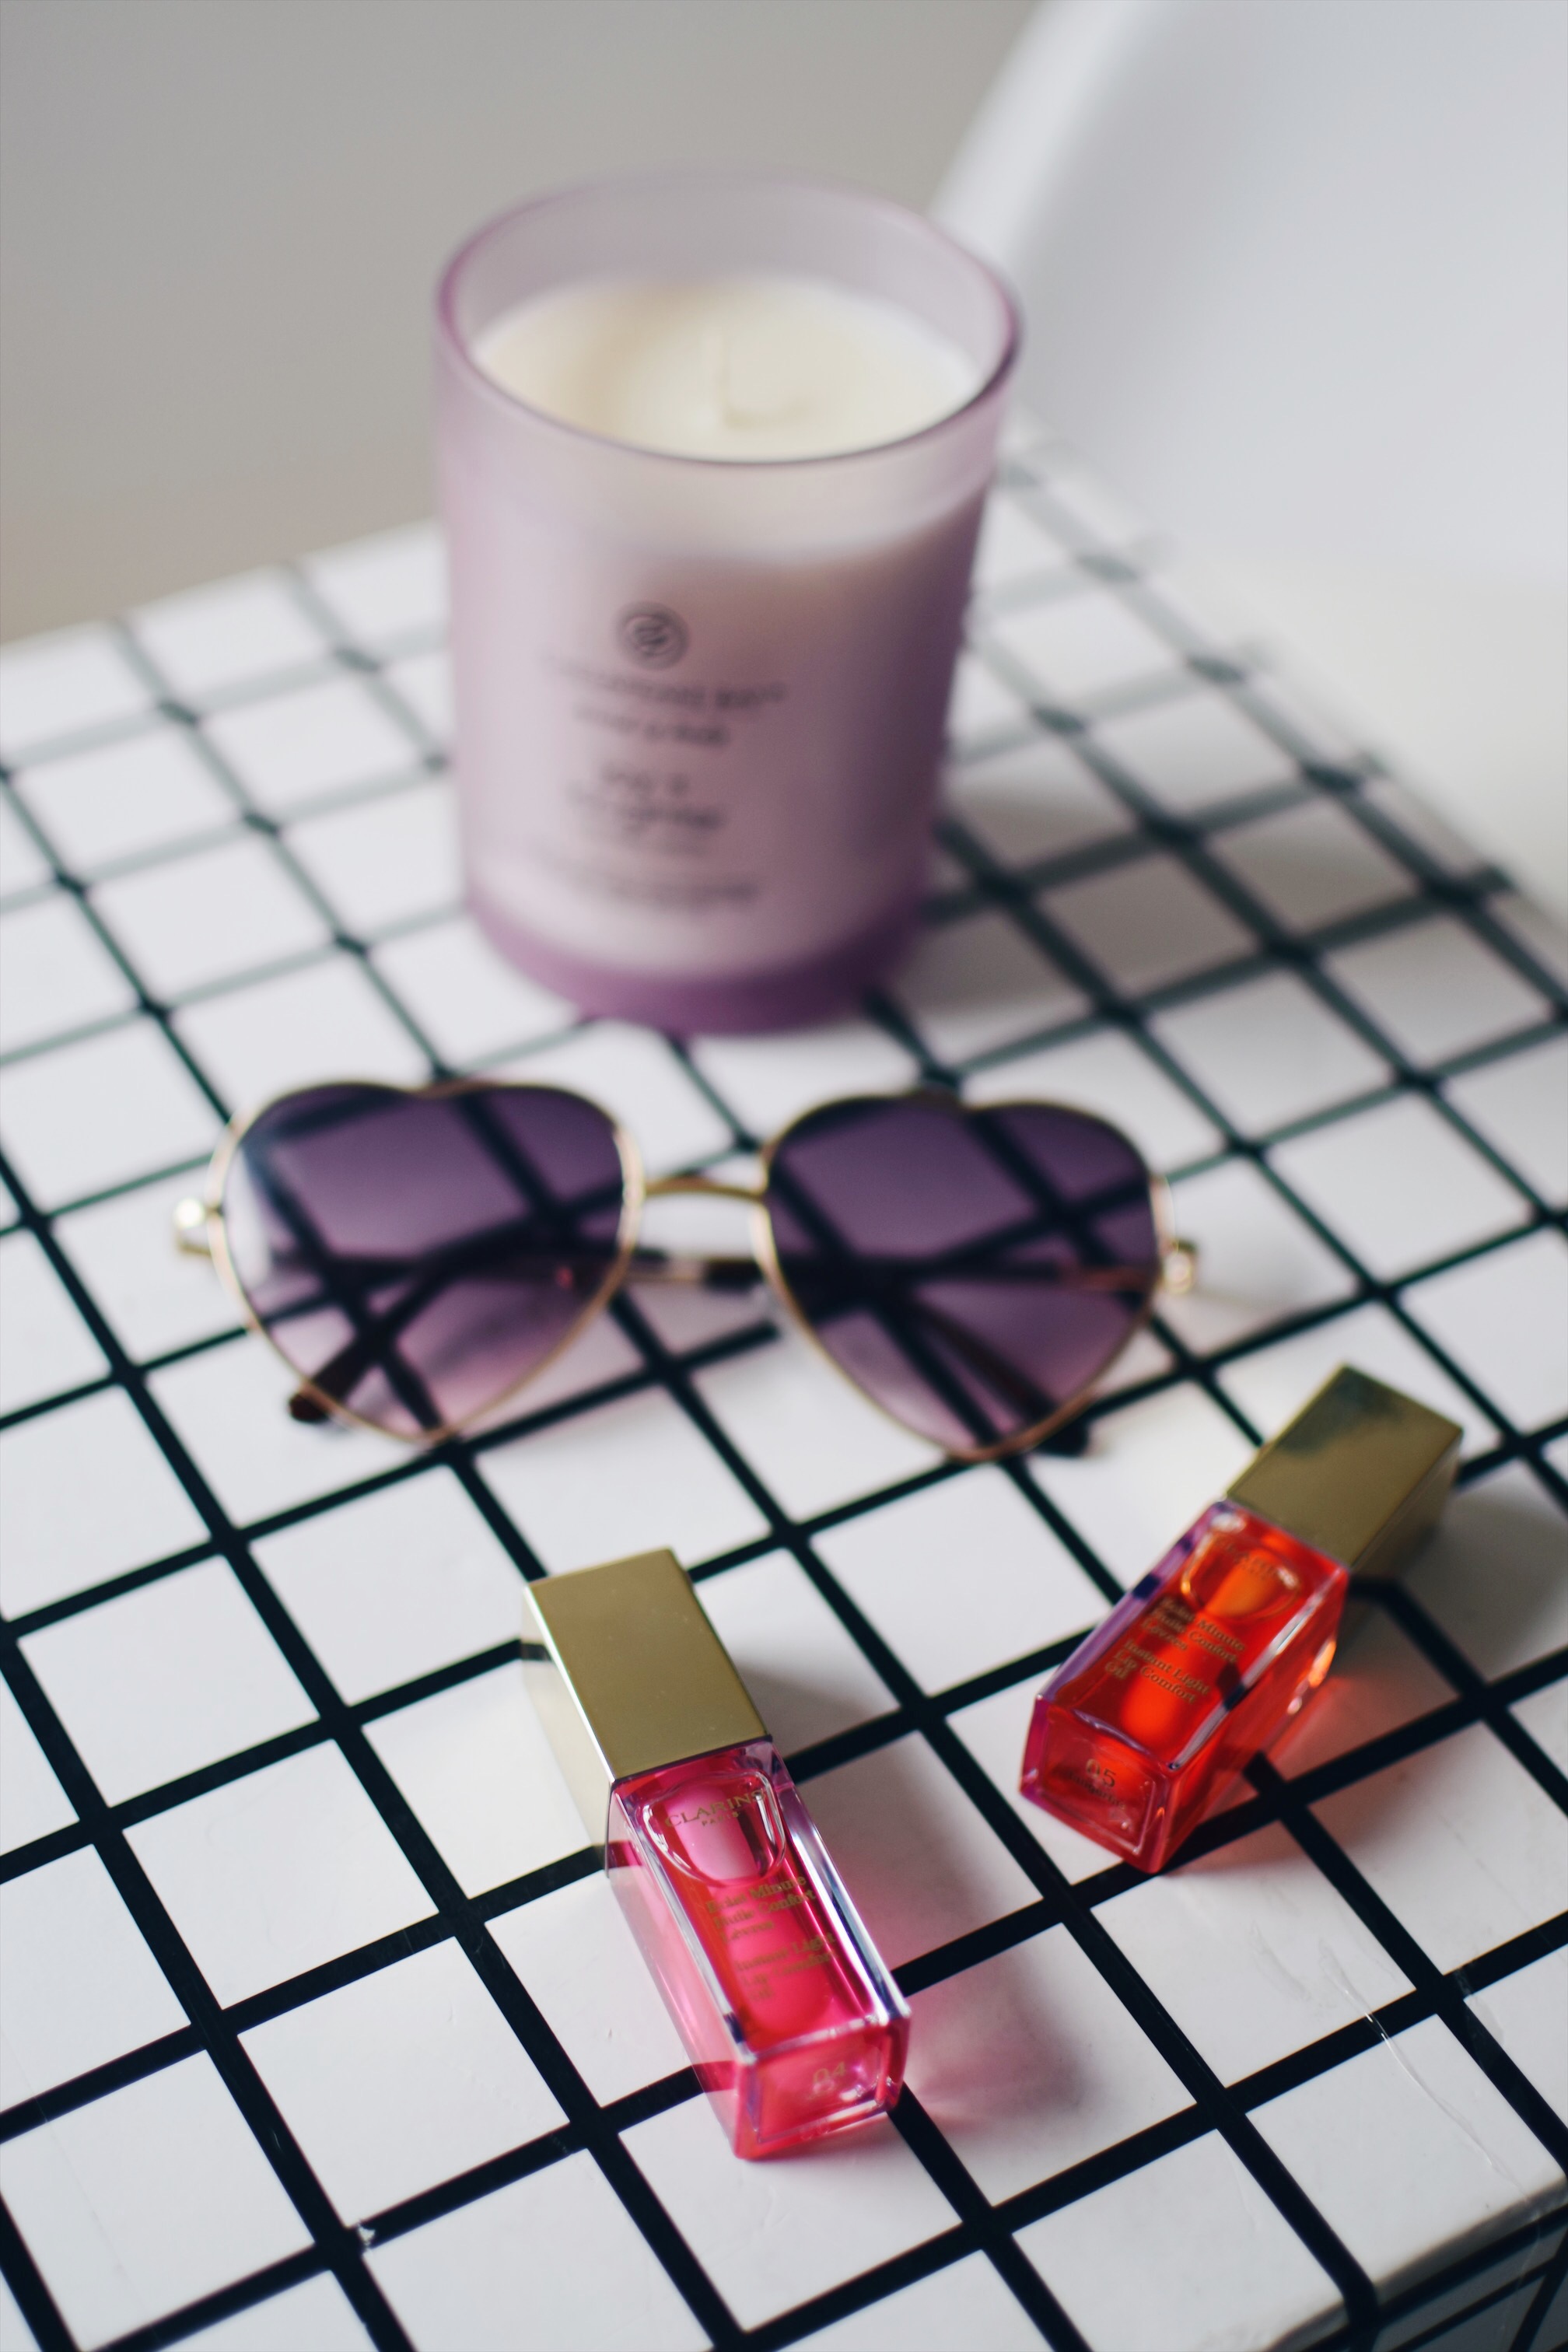 Softer Lips With Clarins Lip Oil Esther Santer Fashion Blog NYC Street Style Blogger Outfit OOTD Trendy Makeup Beauty Candle Flatlay Lipstick Color Shade Plumper Sunglasses Perfume Pretty Product Review  Shop Girl Women Orange Tangerine Pink Candy Buy.JPG